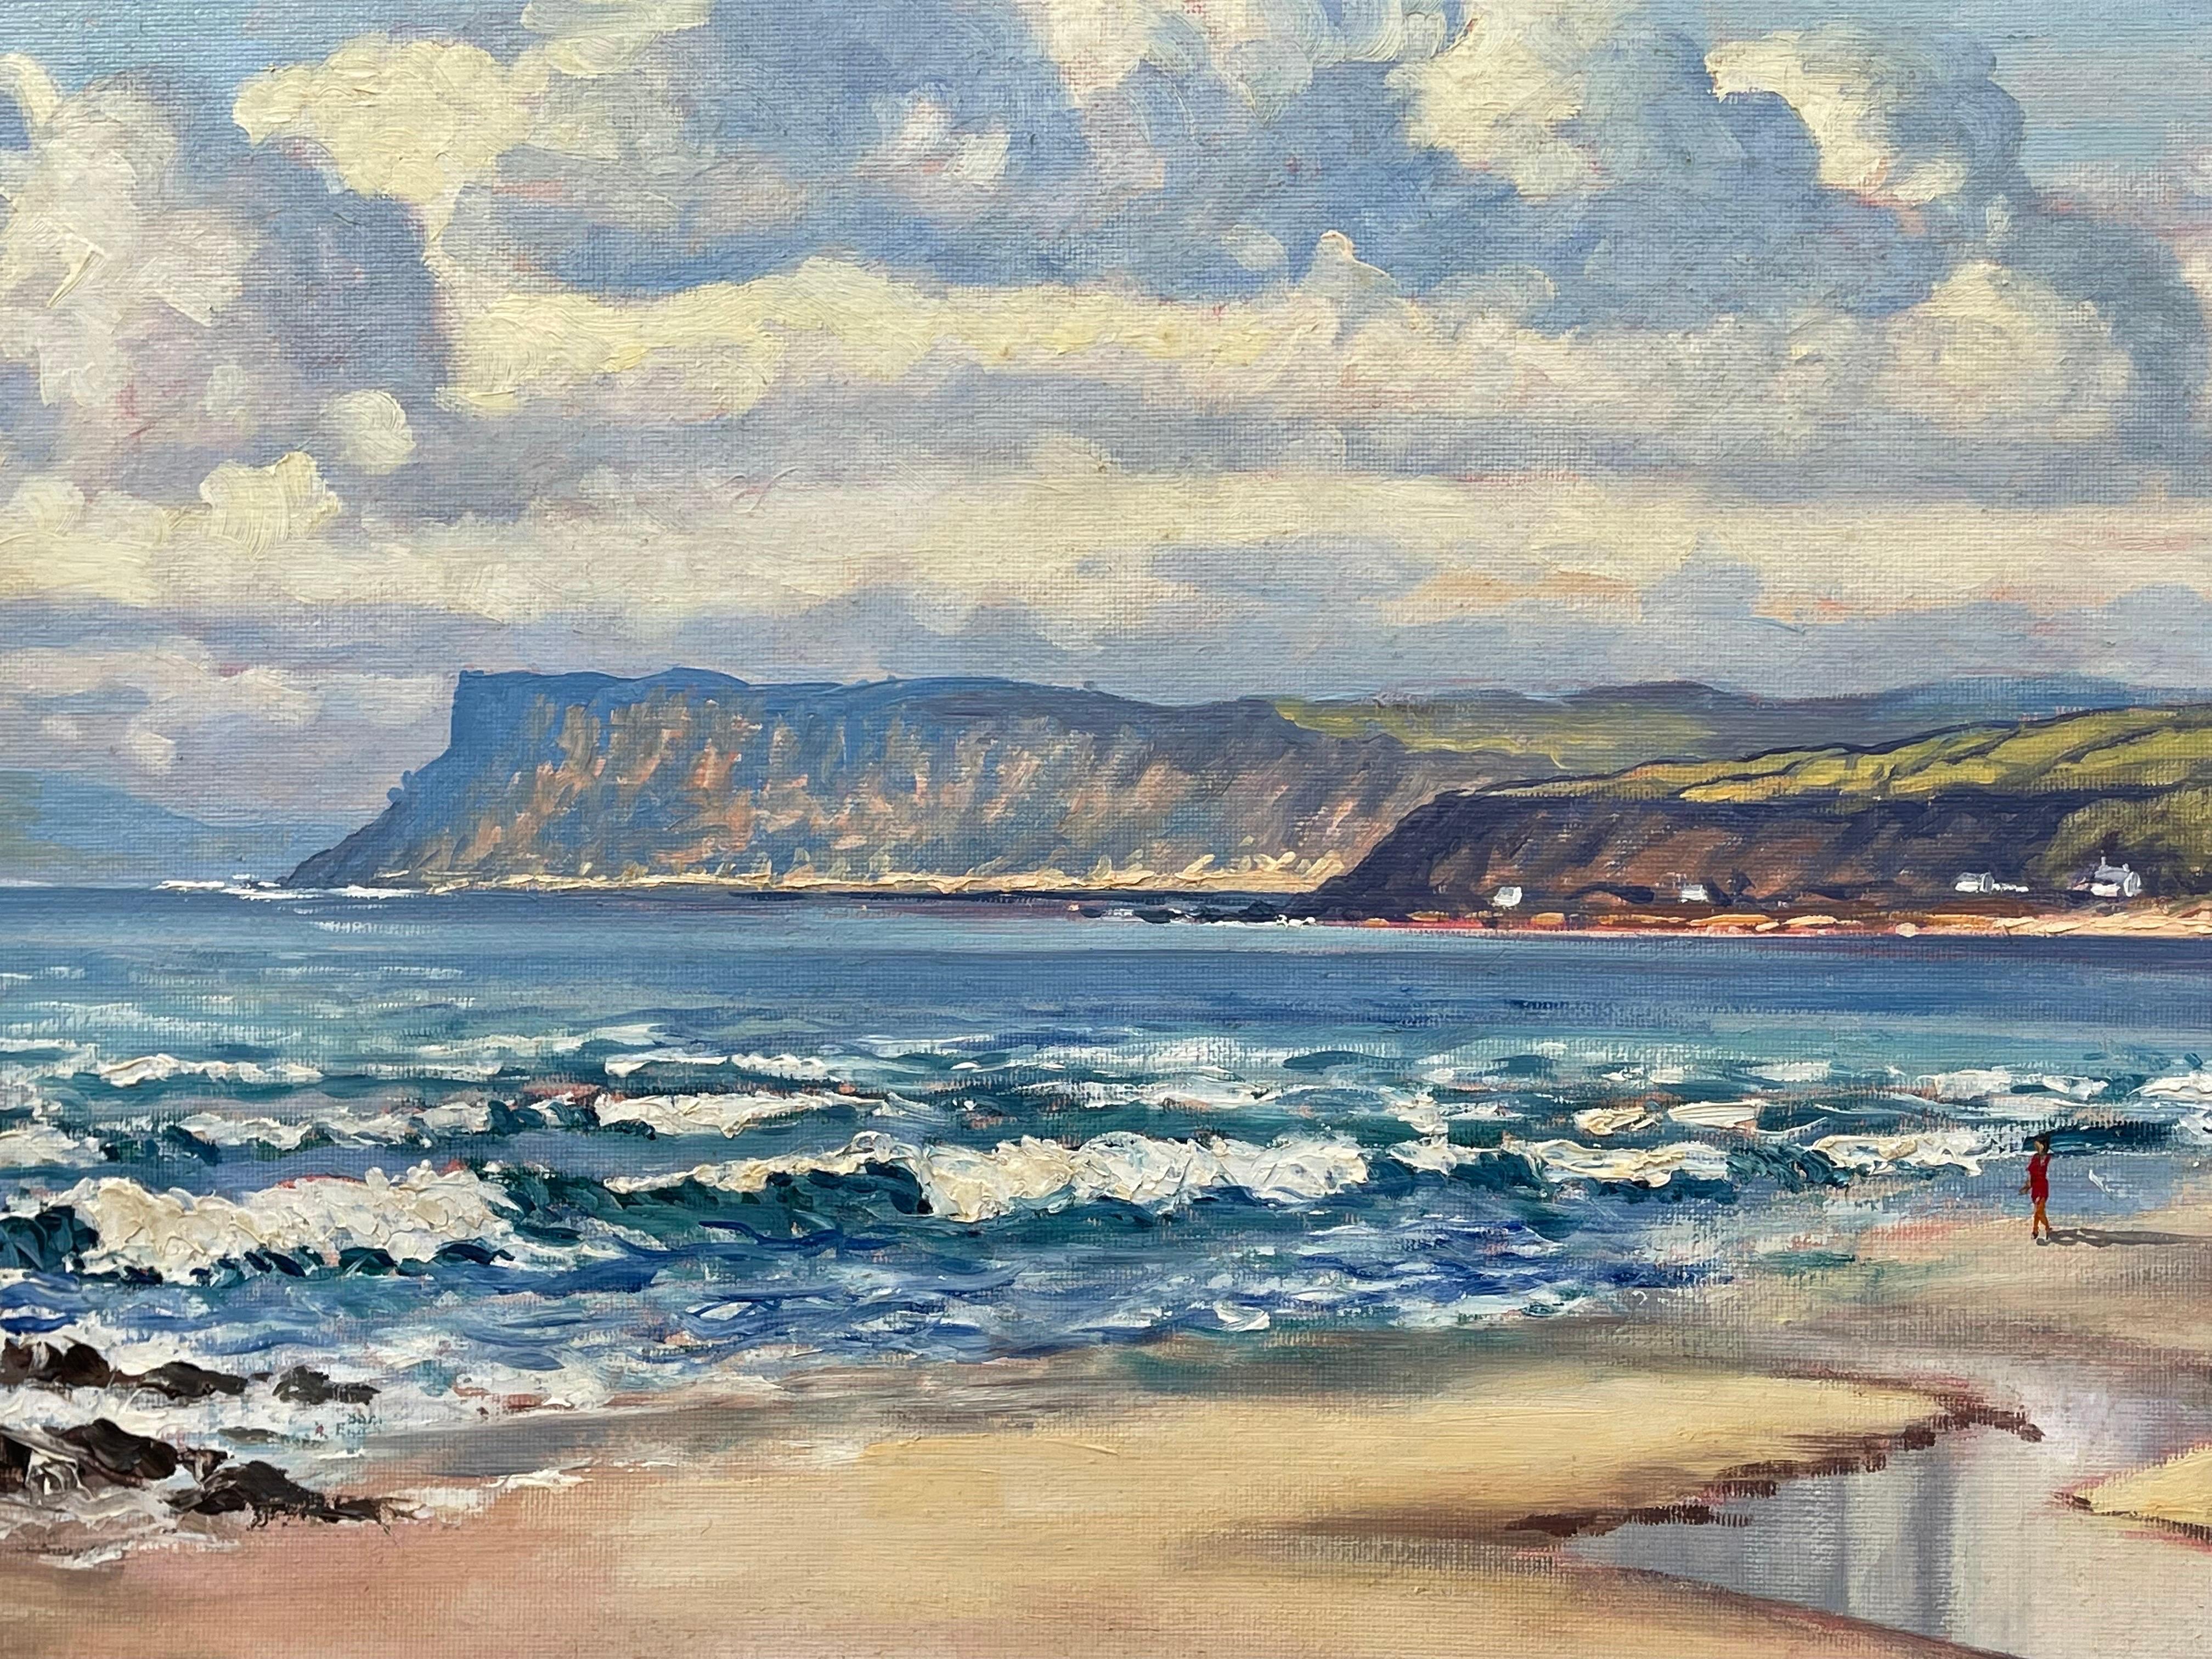 Original Oil Painting of Beach Scene with Figures at Fairhead Ireland by Modern Irish Artist Artist William Henry Burns (1924-1995)

Art measures 42 x 20 inches 

William Henry Burns (1924-1995) was a self-taught landscape painter who was born in